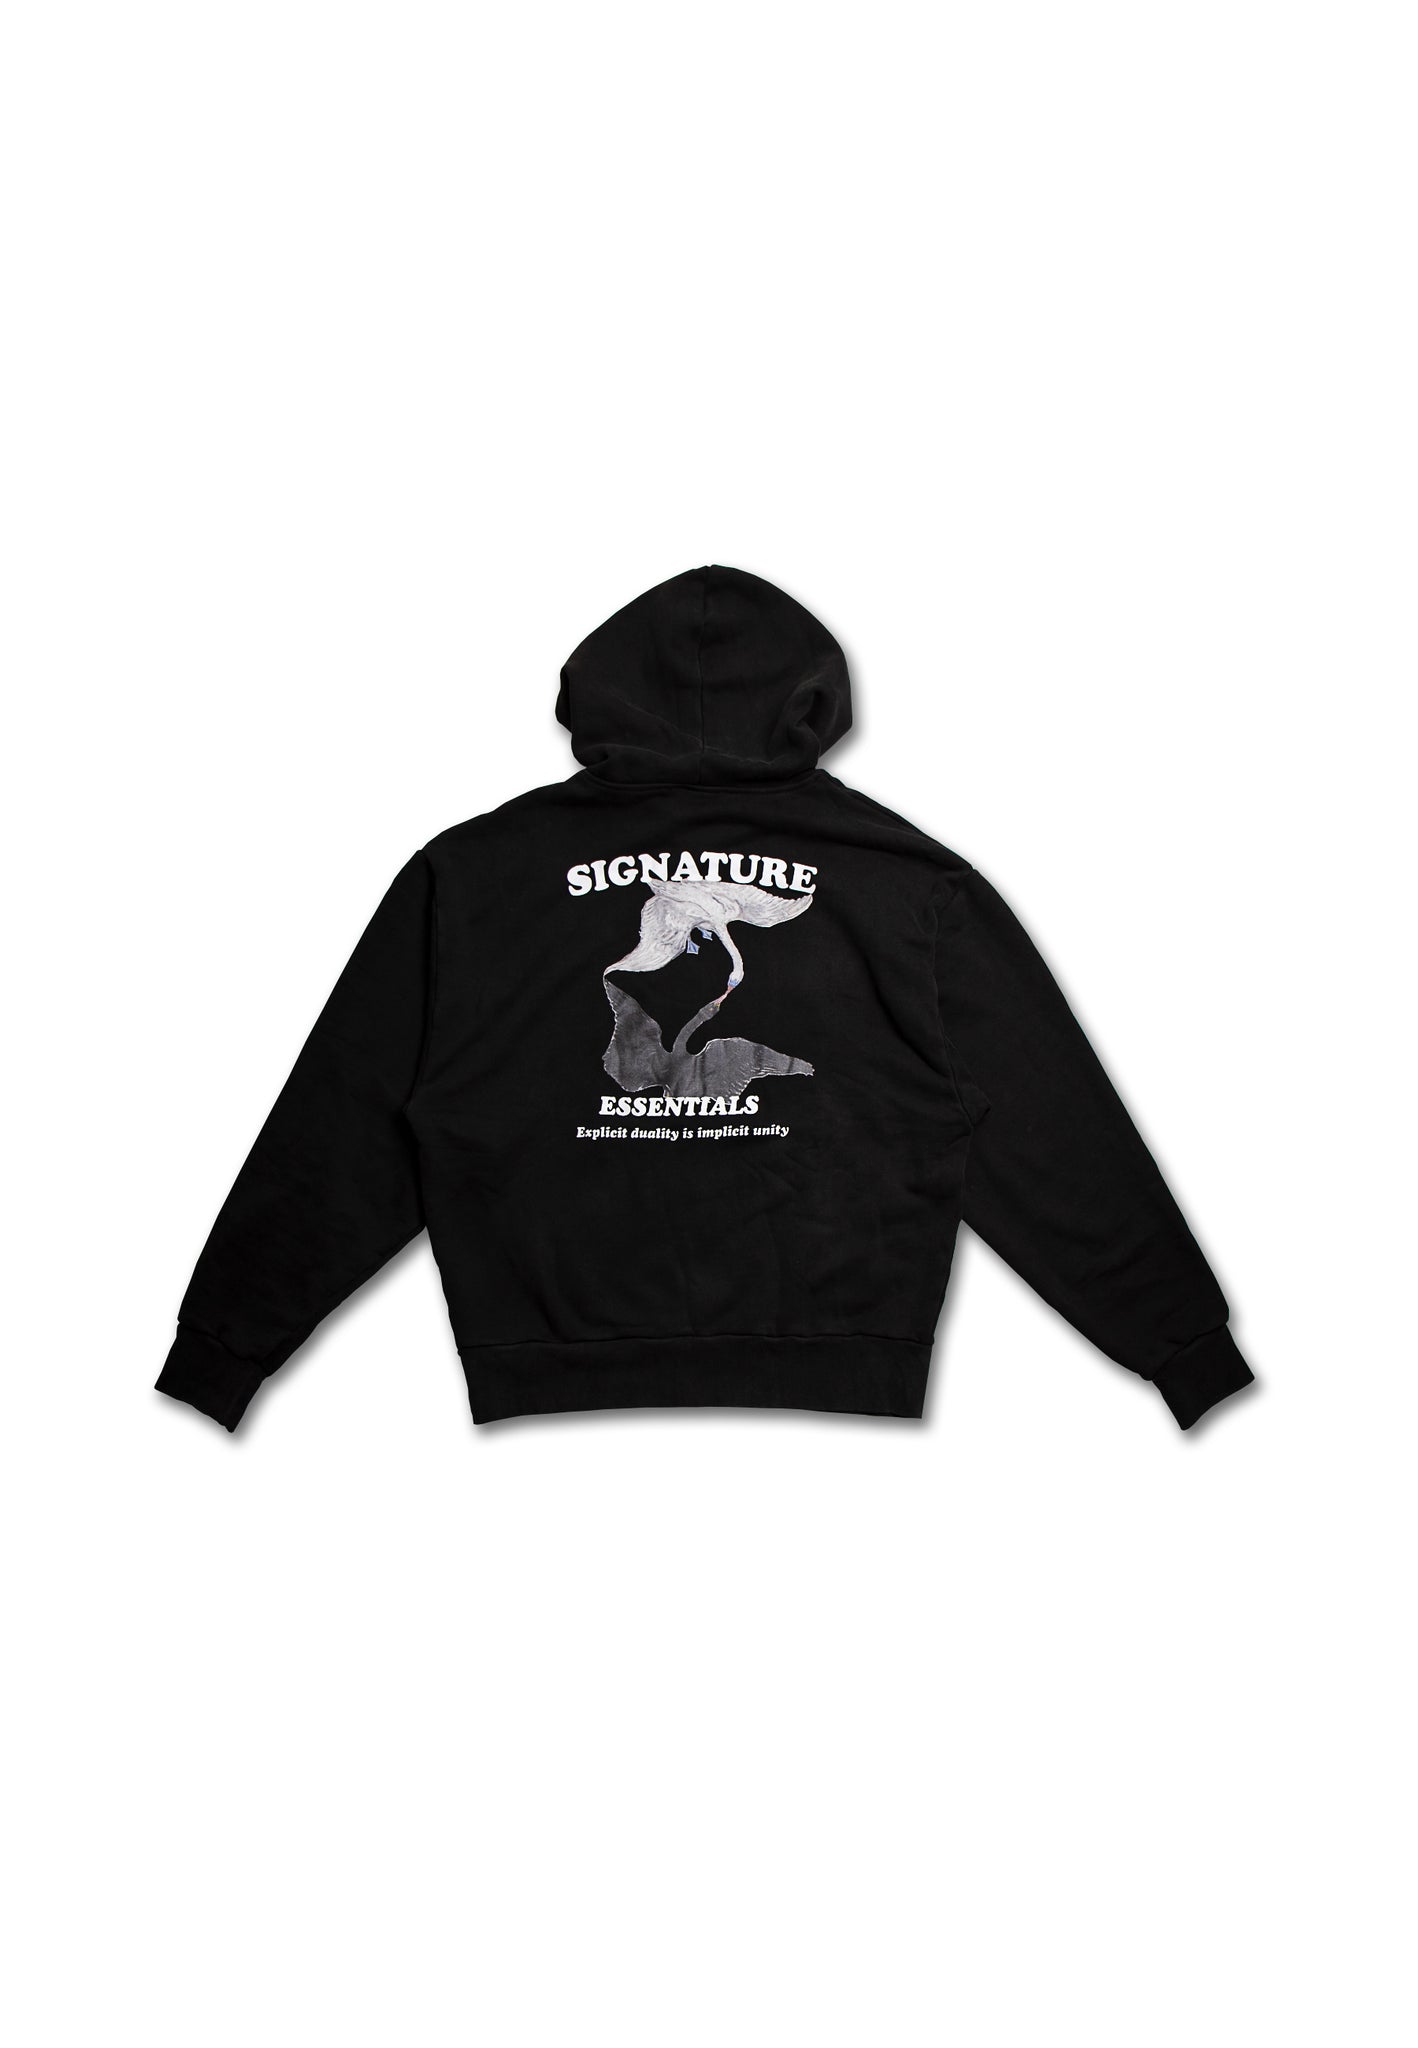 Oversized fit Duality Swan Graphic Hoodie back pack shoot